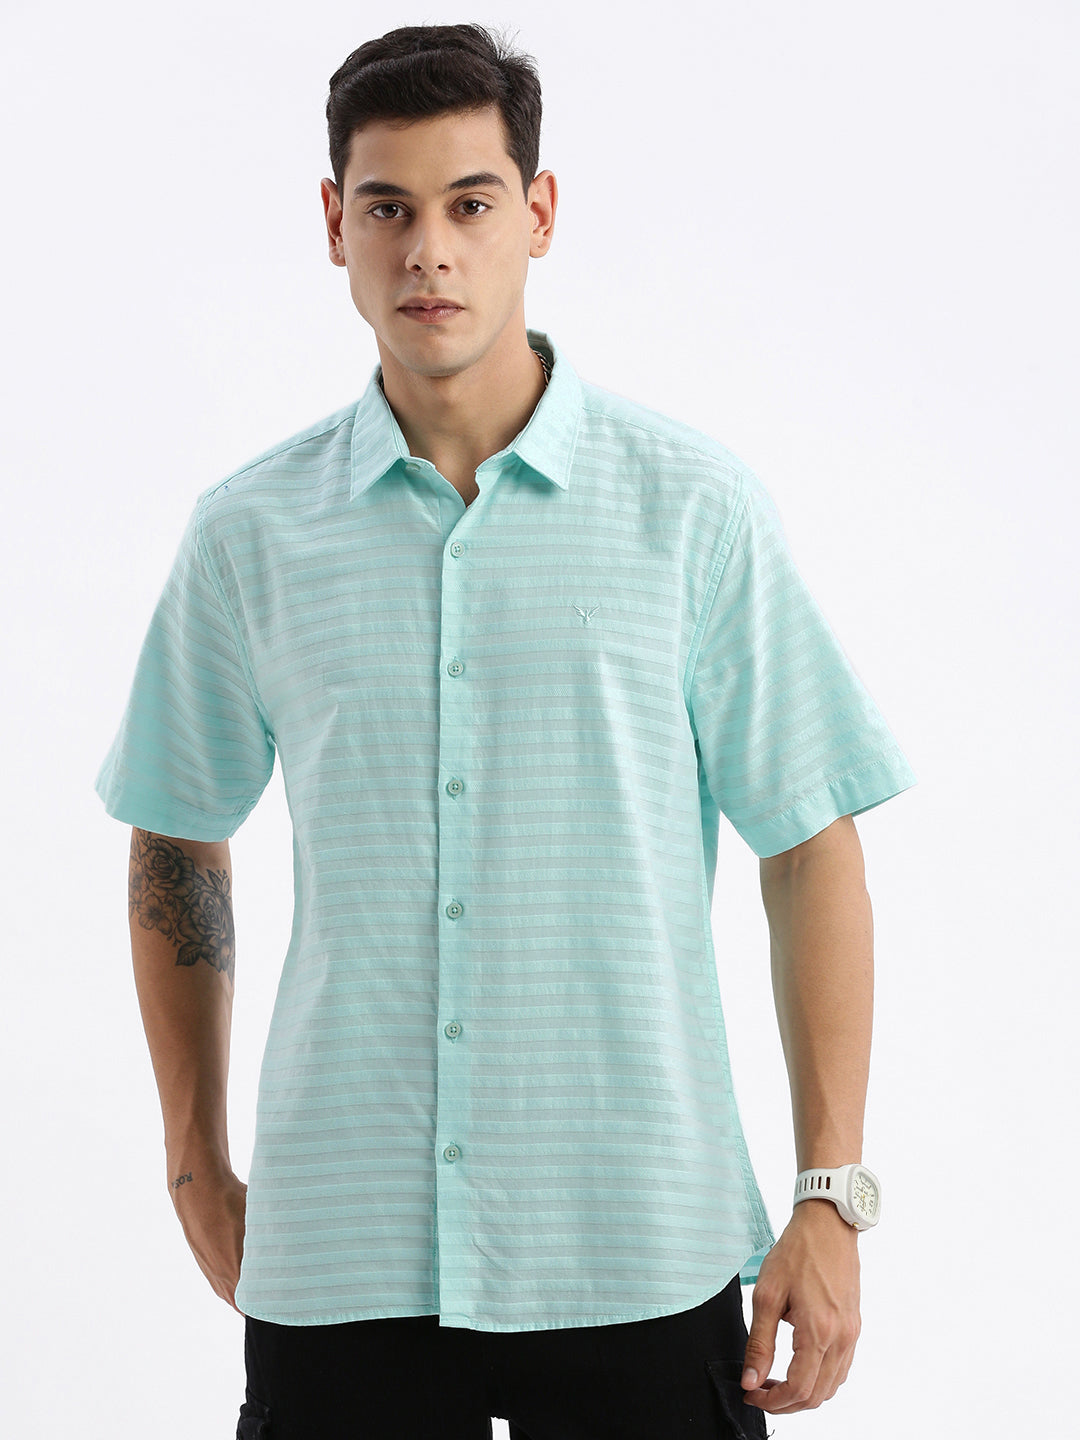 Men Spread Collar Solid Slim Fit Turquoise Blue Shirt